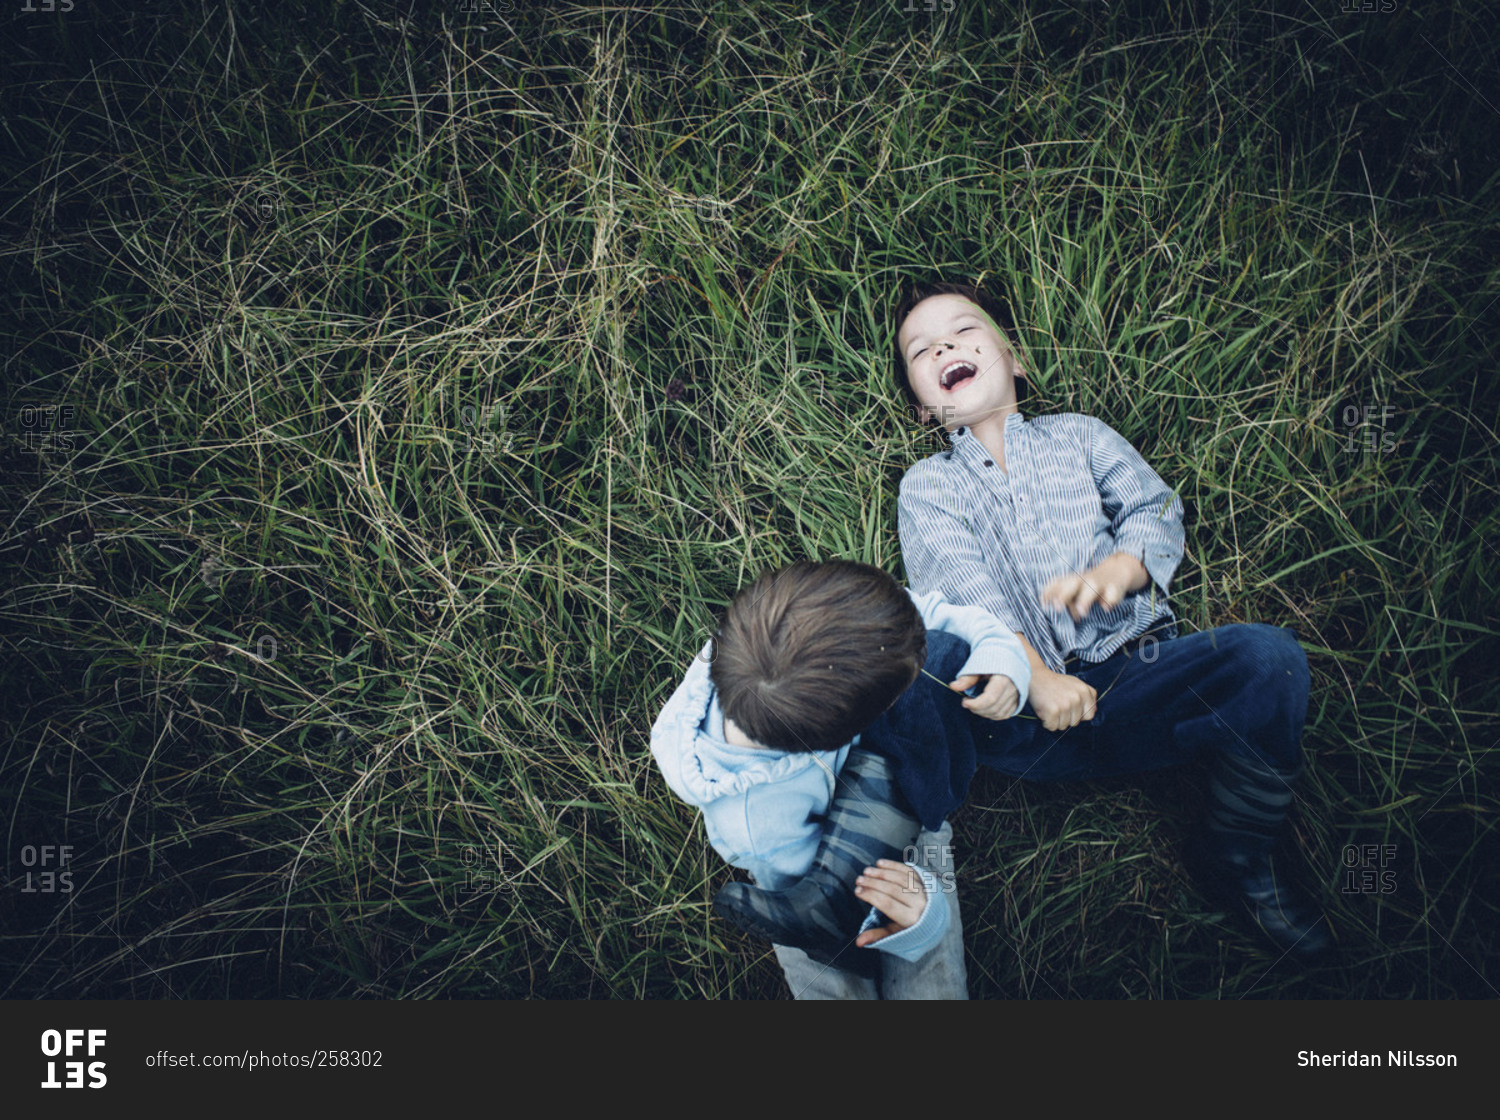 Two boys wrestling and laughing in field